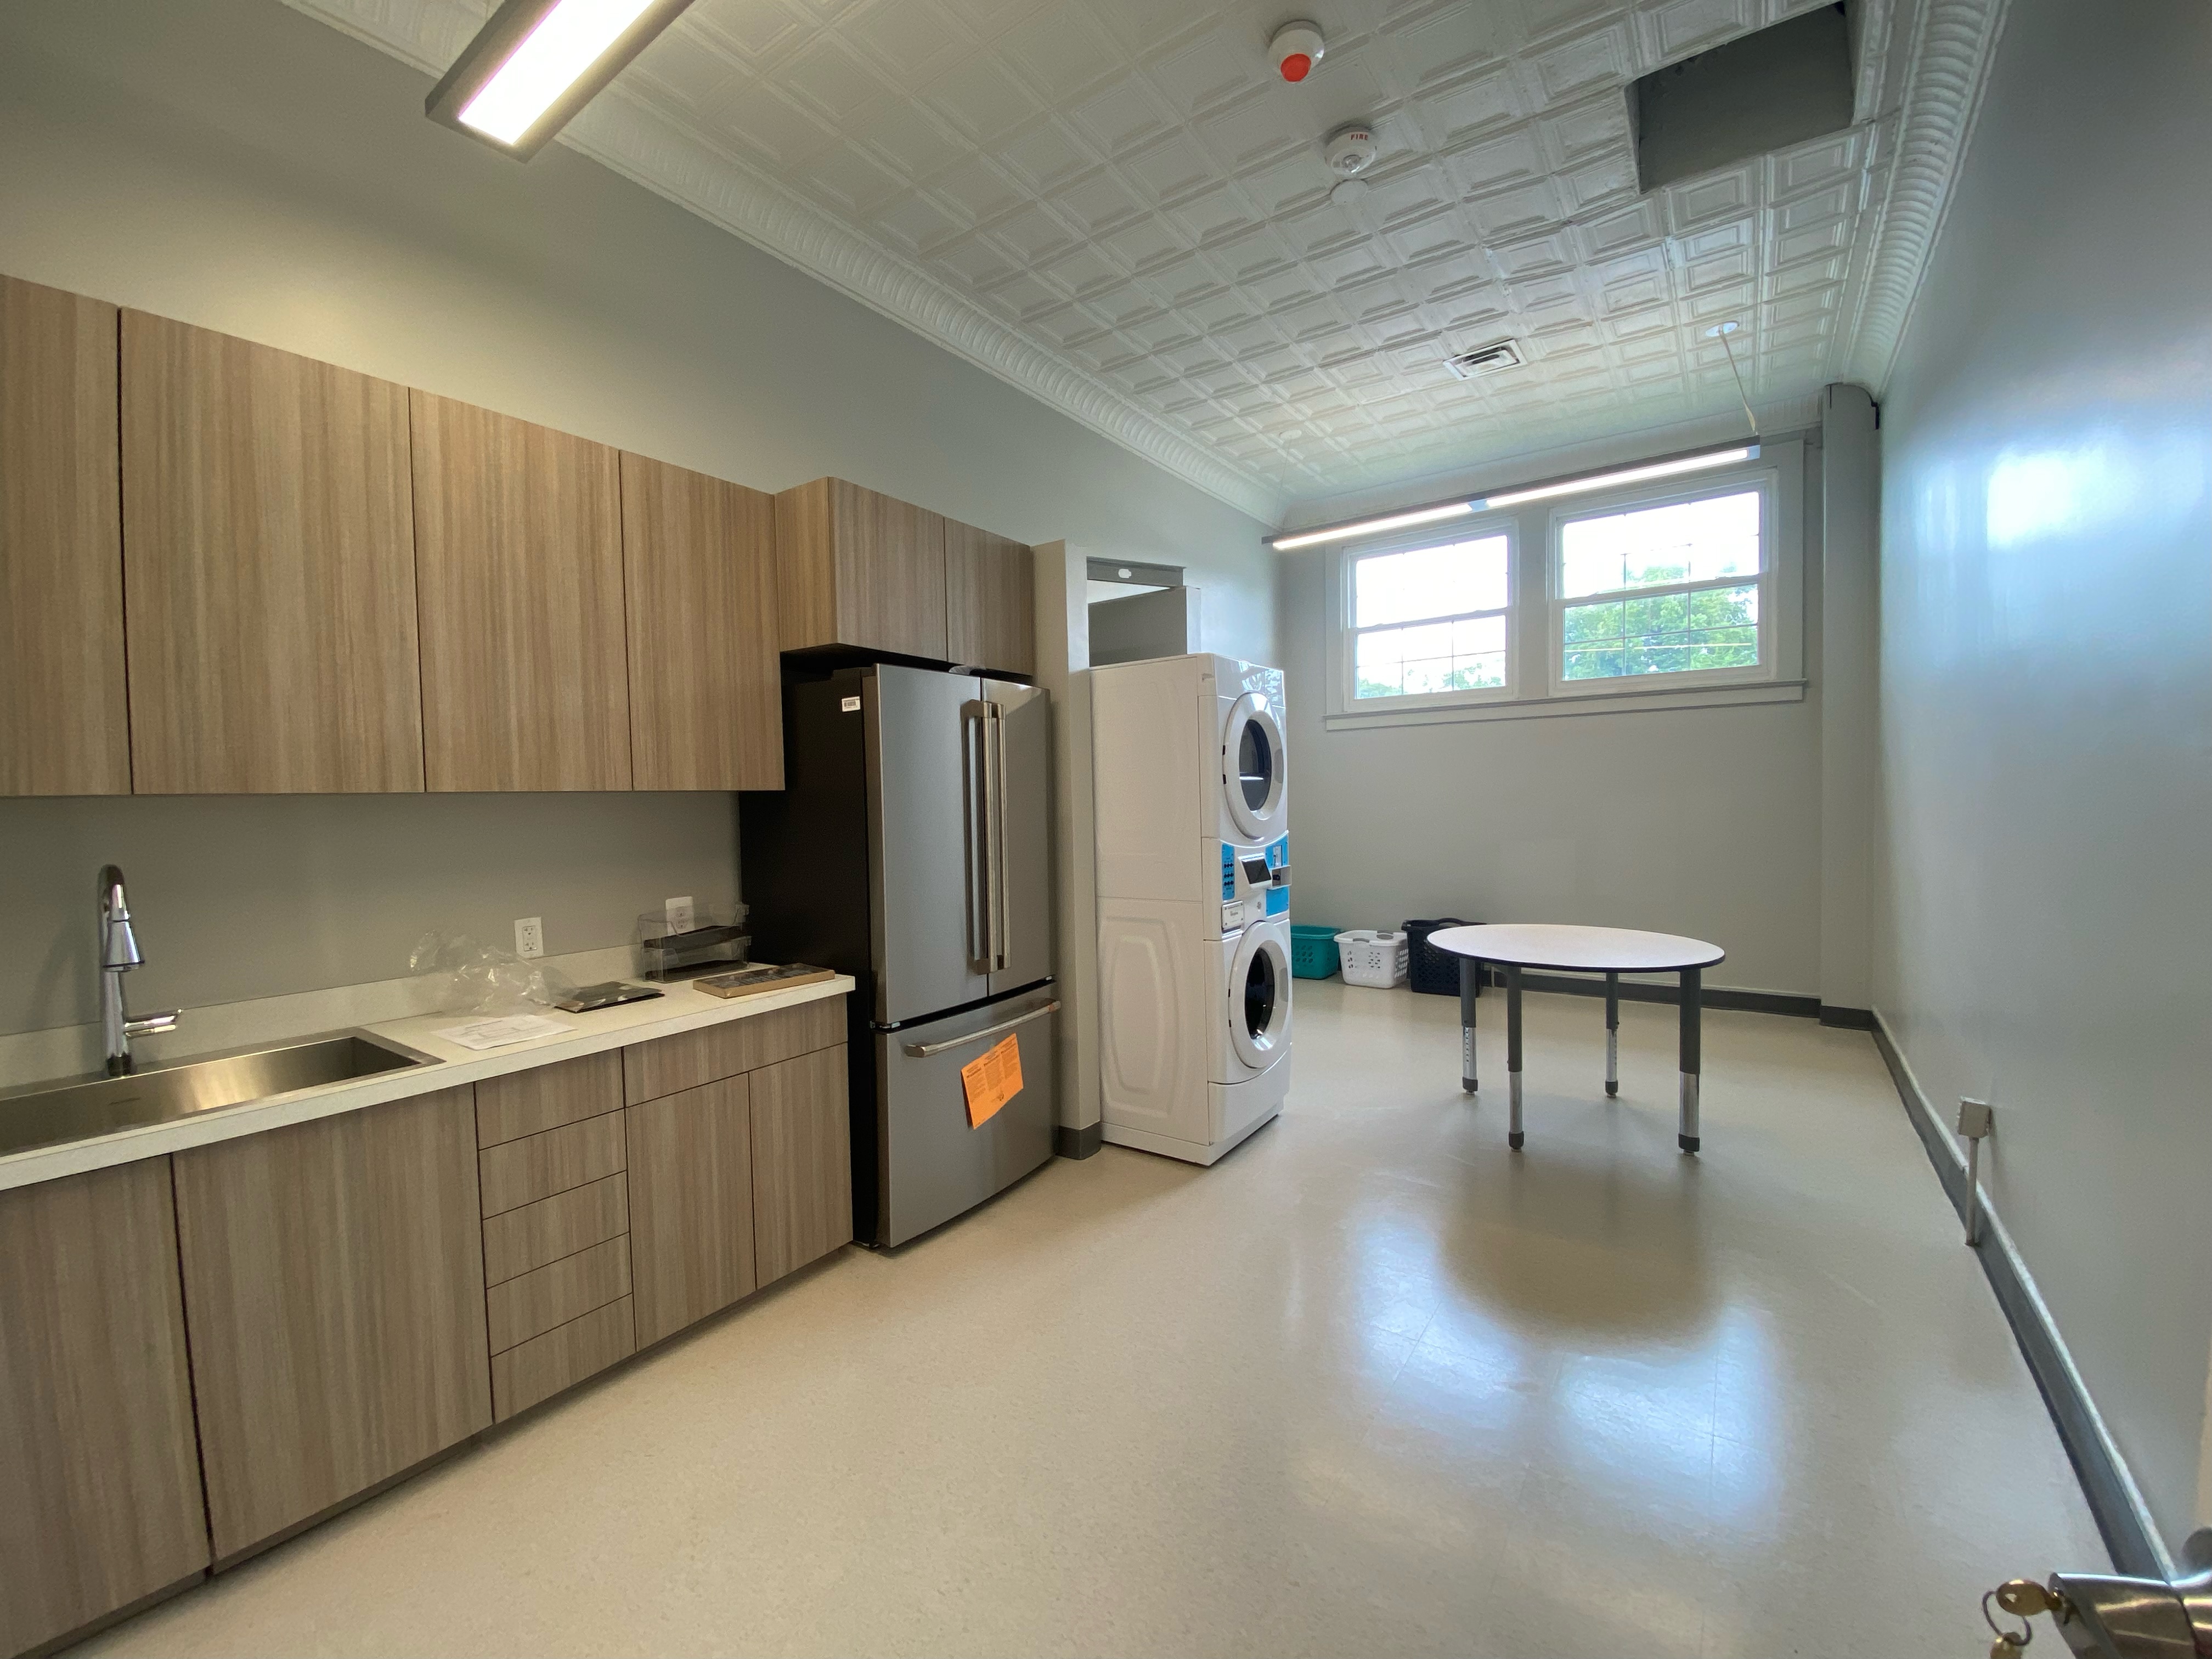 Lifeskills room with fridge, counters, washer, and dryer